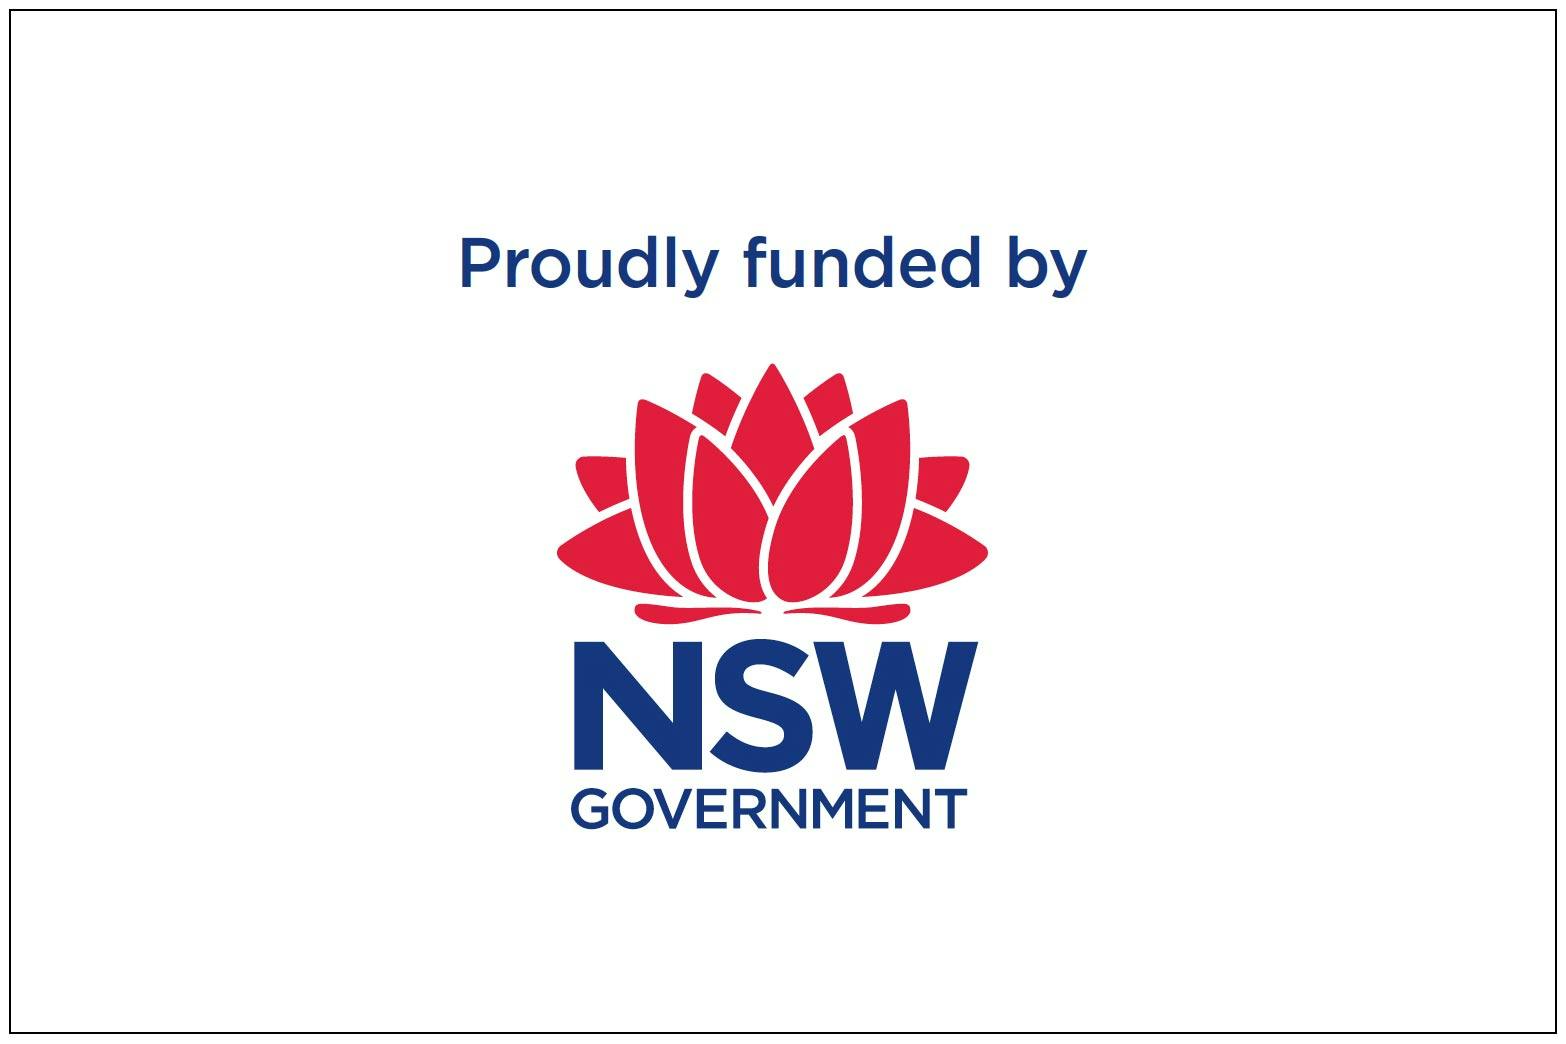 Proudly funded by NSW Government